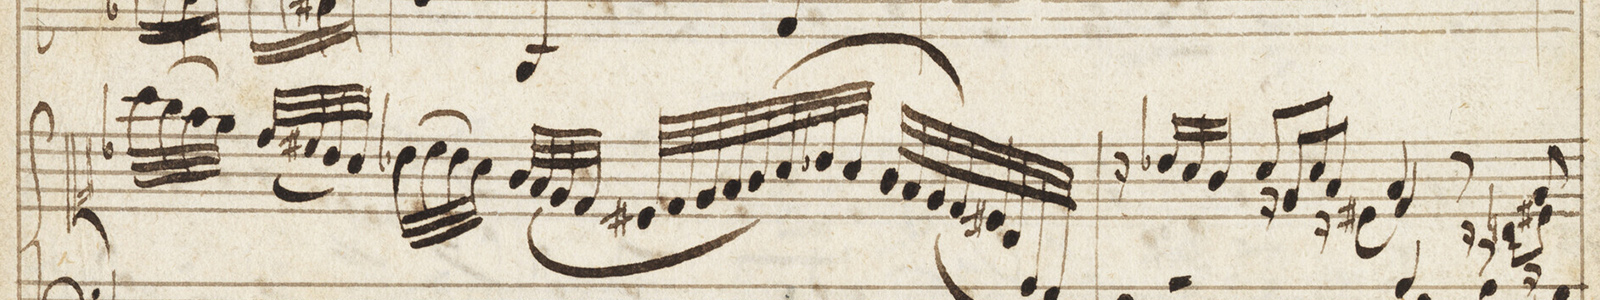 The History of Western Music: Manuscripts from the Schøyen Collection